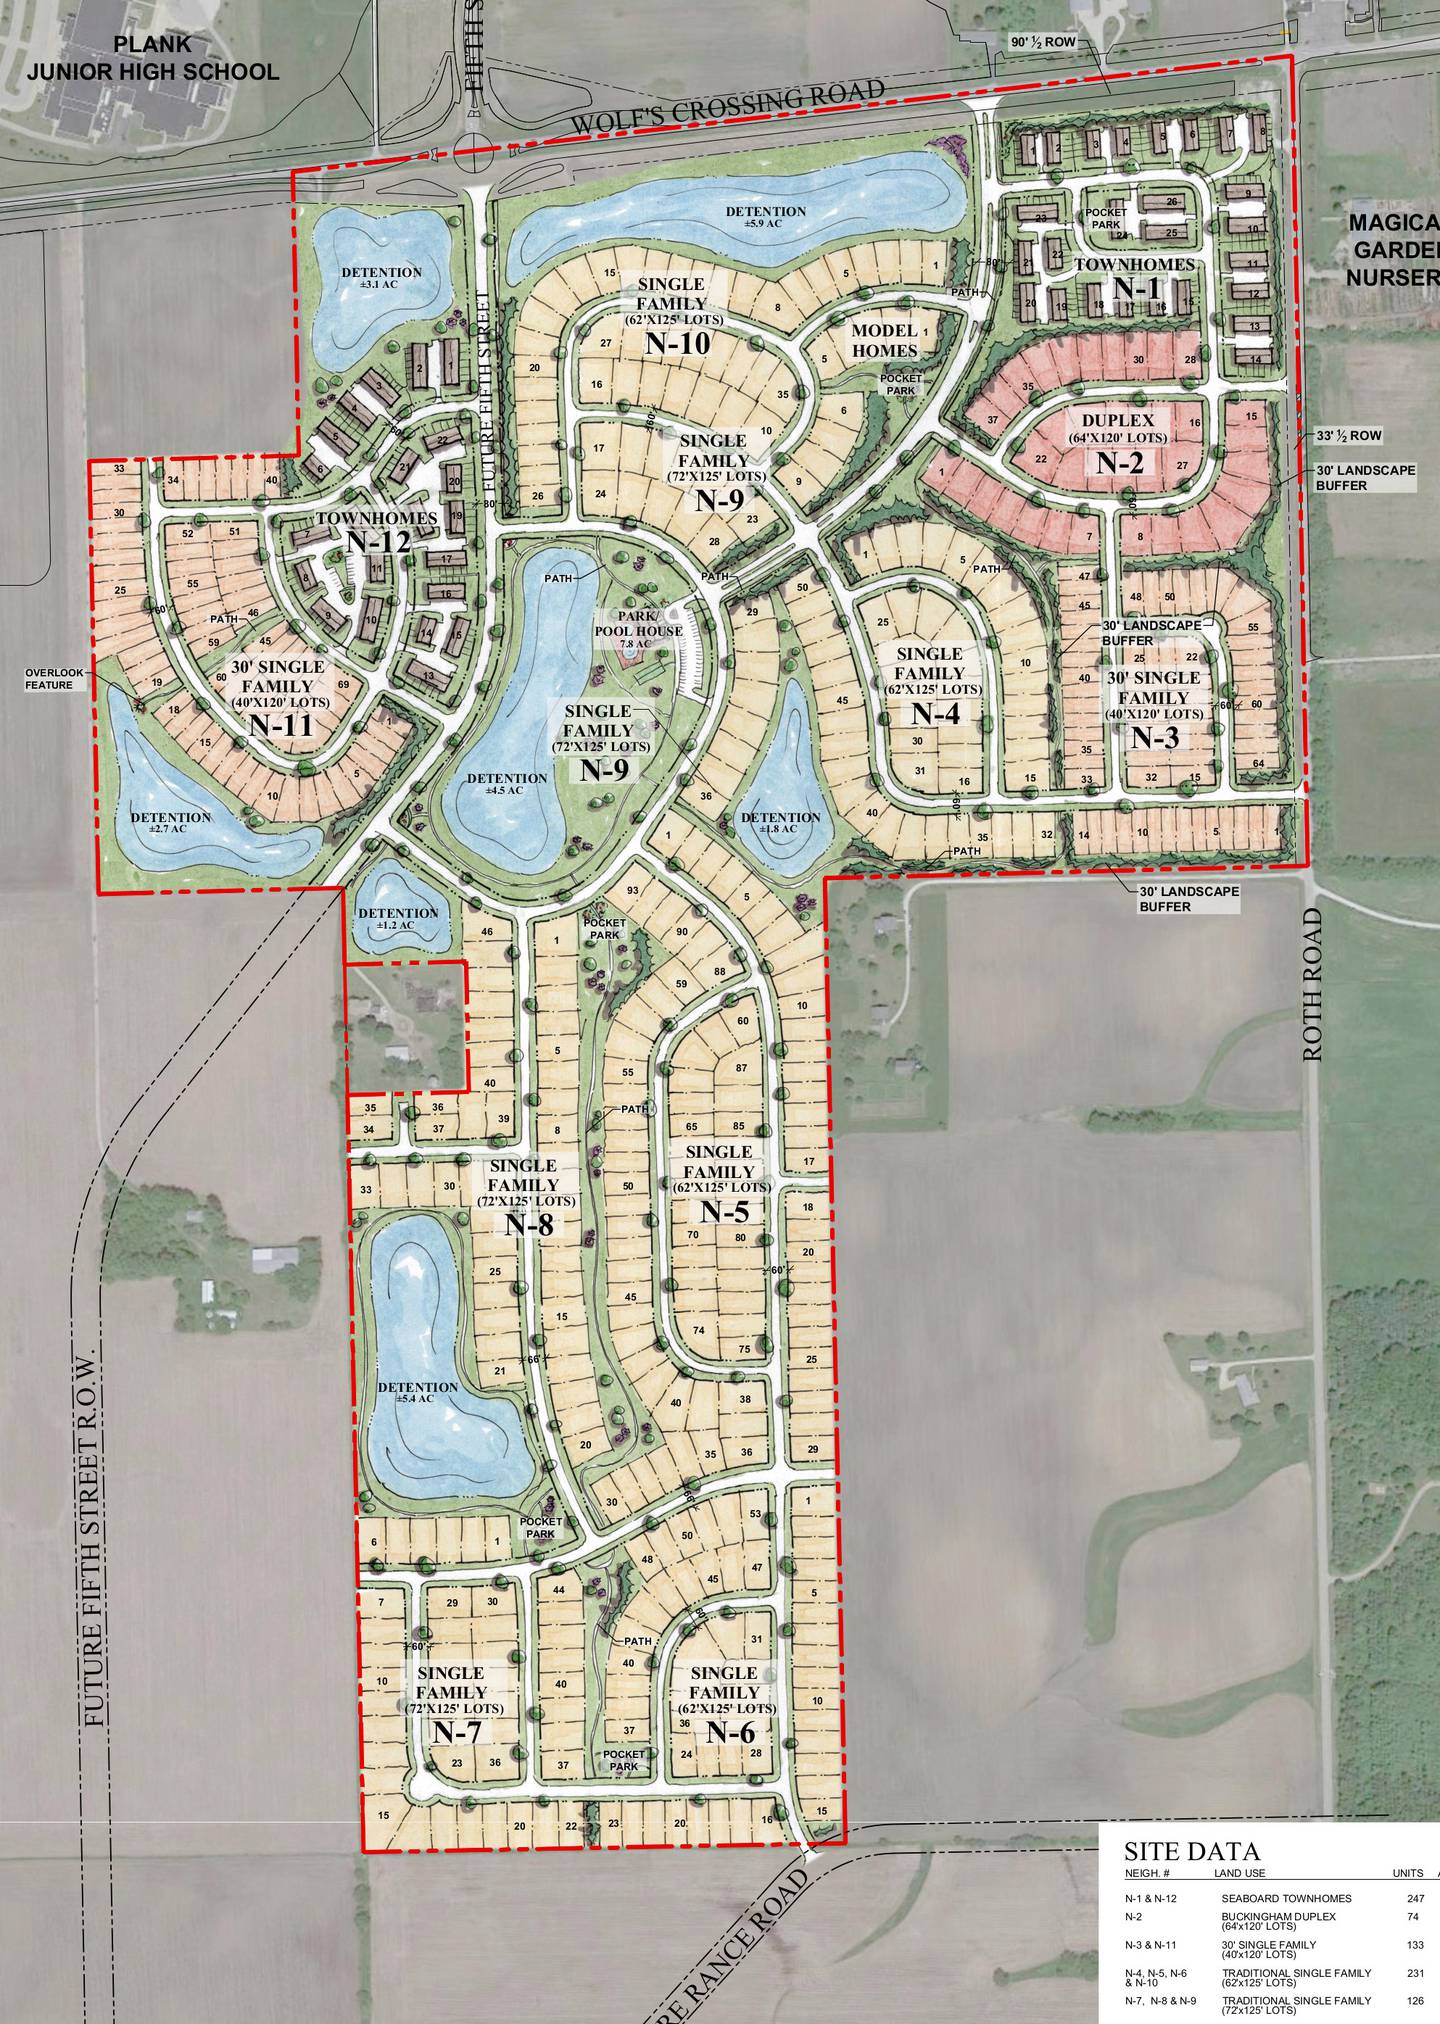 Concept map for Sonoma Trails housing development from an Aug. 4 agenda item, submitted to the Village of Oswego's planning and zoning commission by developer D.R. Horton. (photo provided)